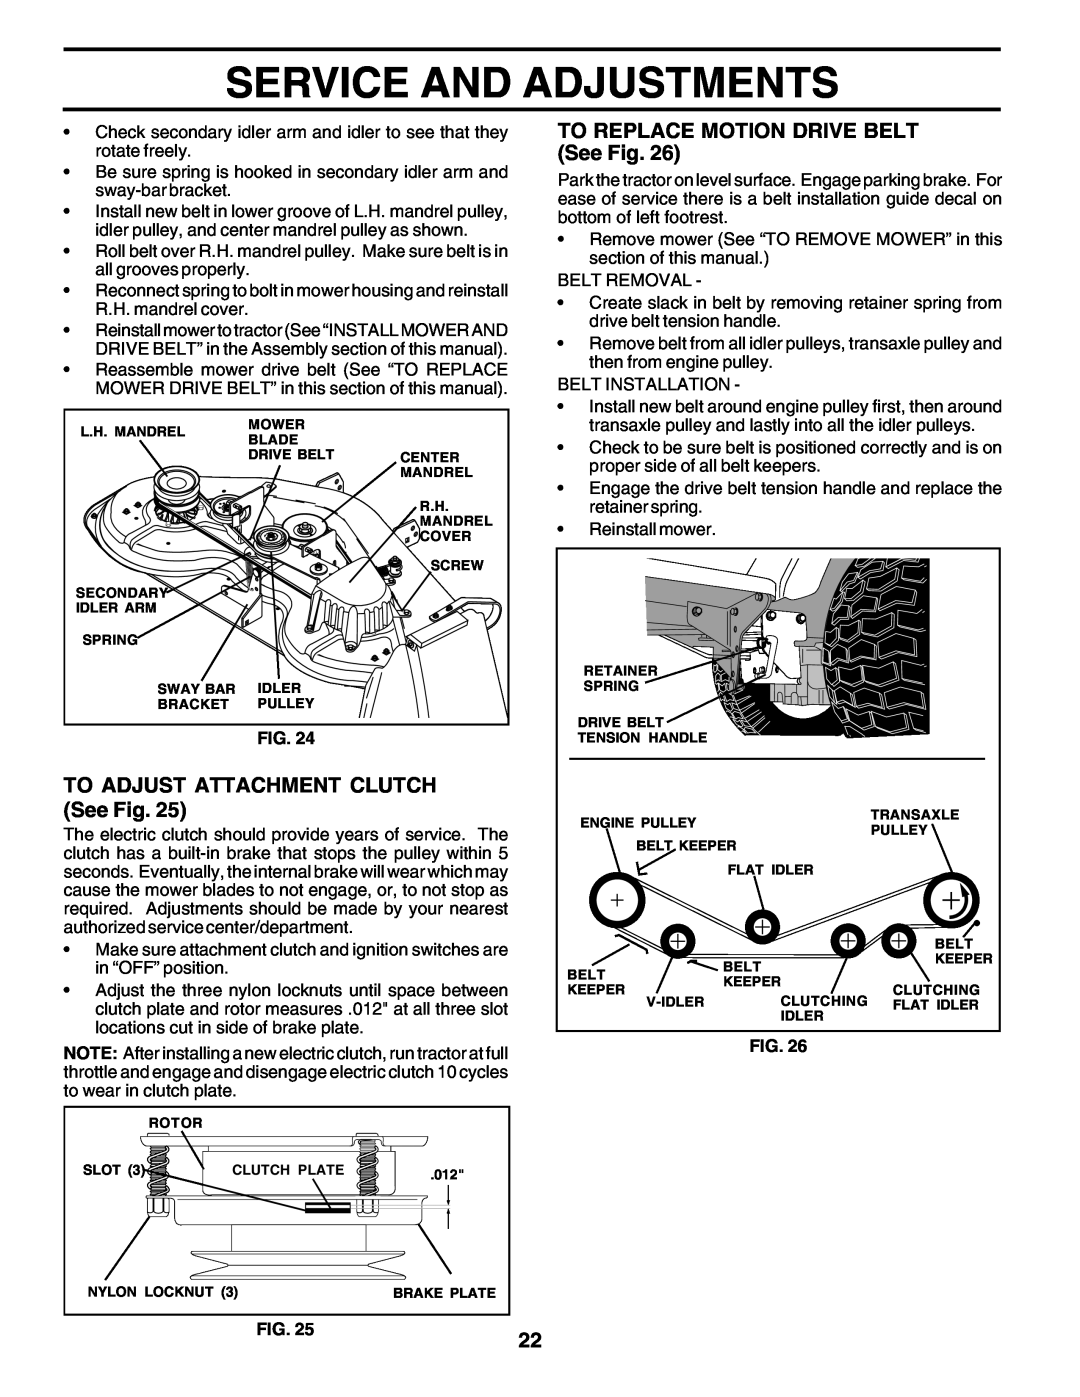 Poulan 177937 Service And Adjustments, TO ADJUST ATTACHMENT CLUTCH See Fig, TO REPLACE MOTION DRIVE BELT See Fig 